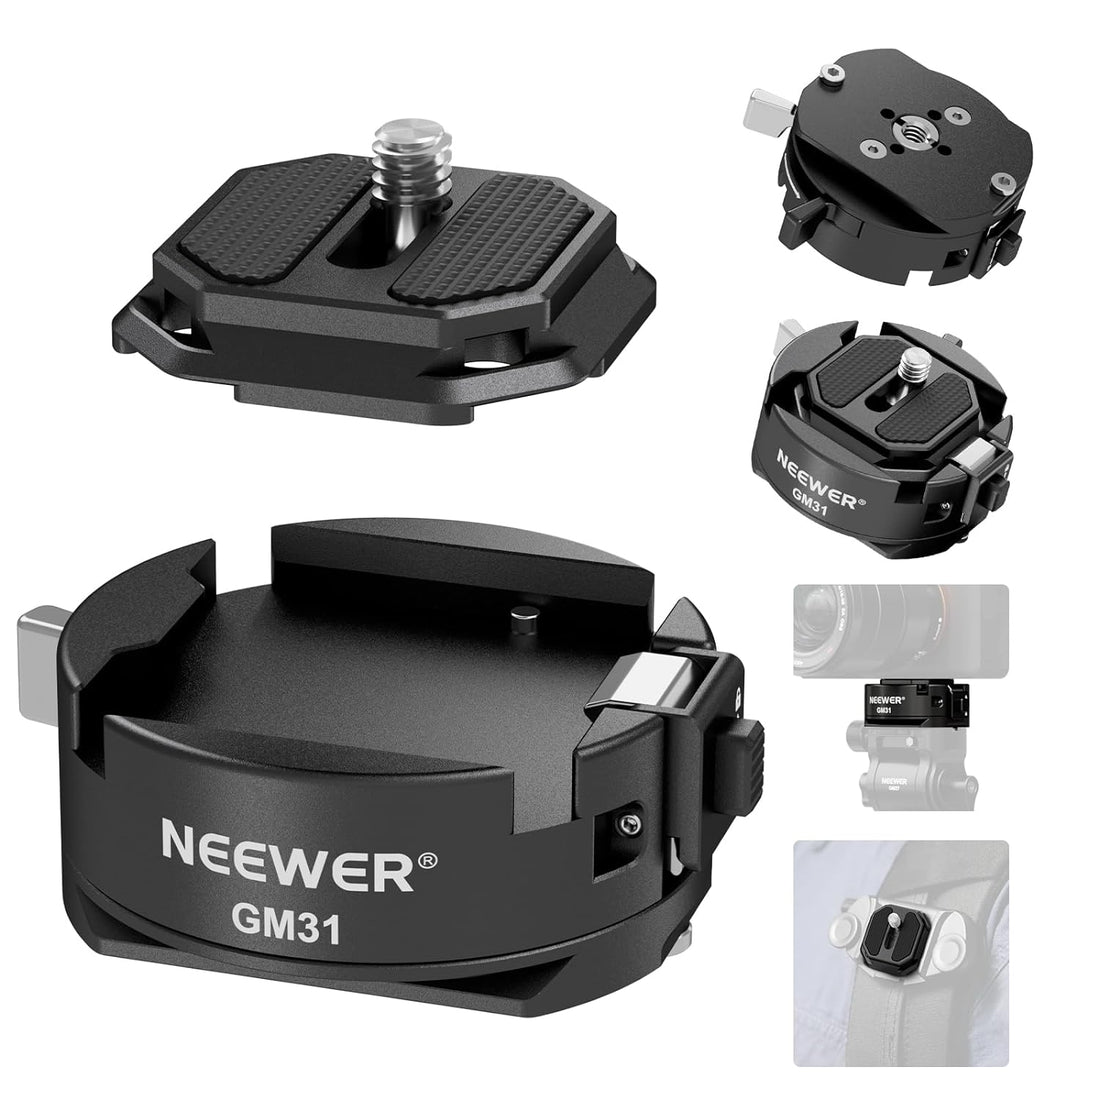 NEEWER Arca Type Quick Release Plate Kit with Auto Locking, Square QR Camera Mounting Plate Compatible with PD Peak Design, 1/4" 3/8" Thread for Tripod Head Slider Compatible with DJI RS Gimbal, GM31